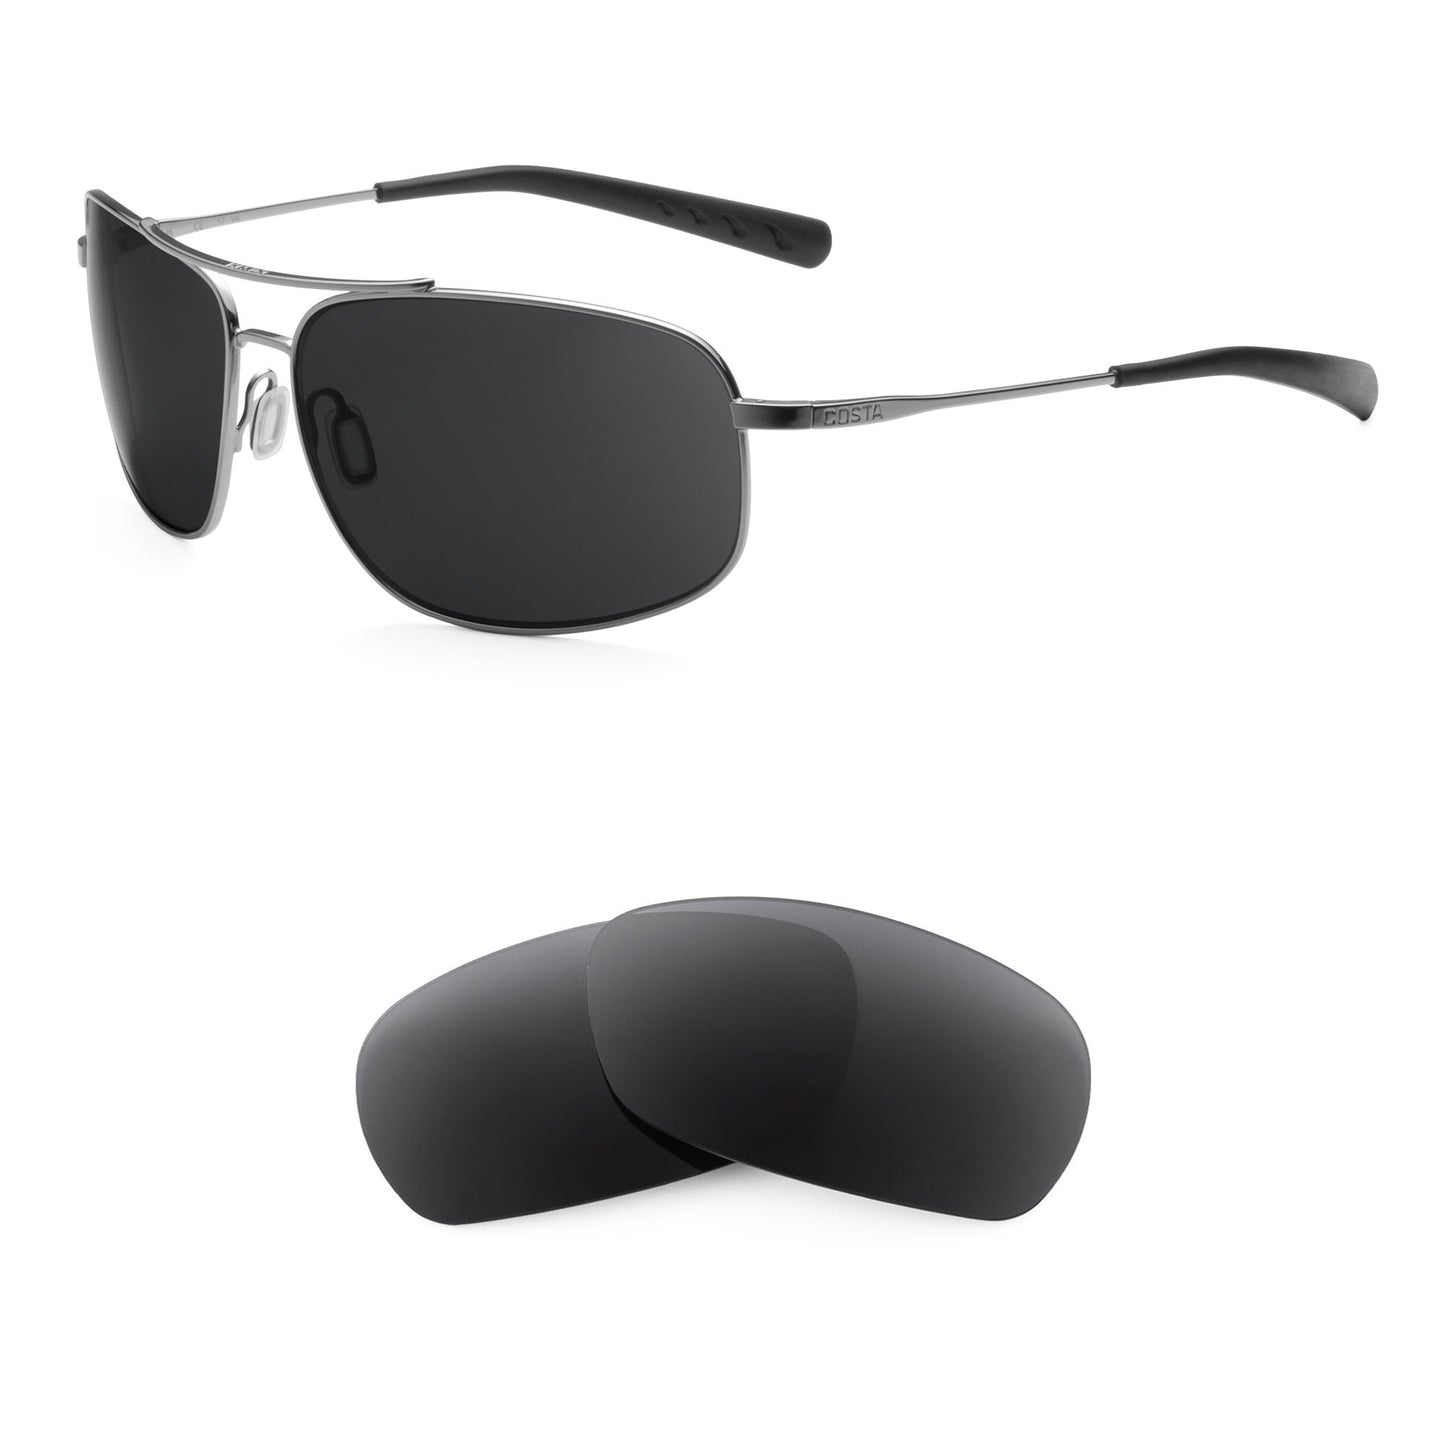 Costa Shipmaster sunglasses with replacement lenses